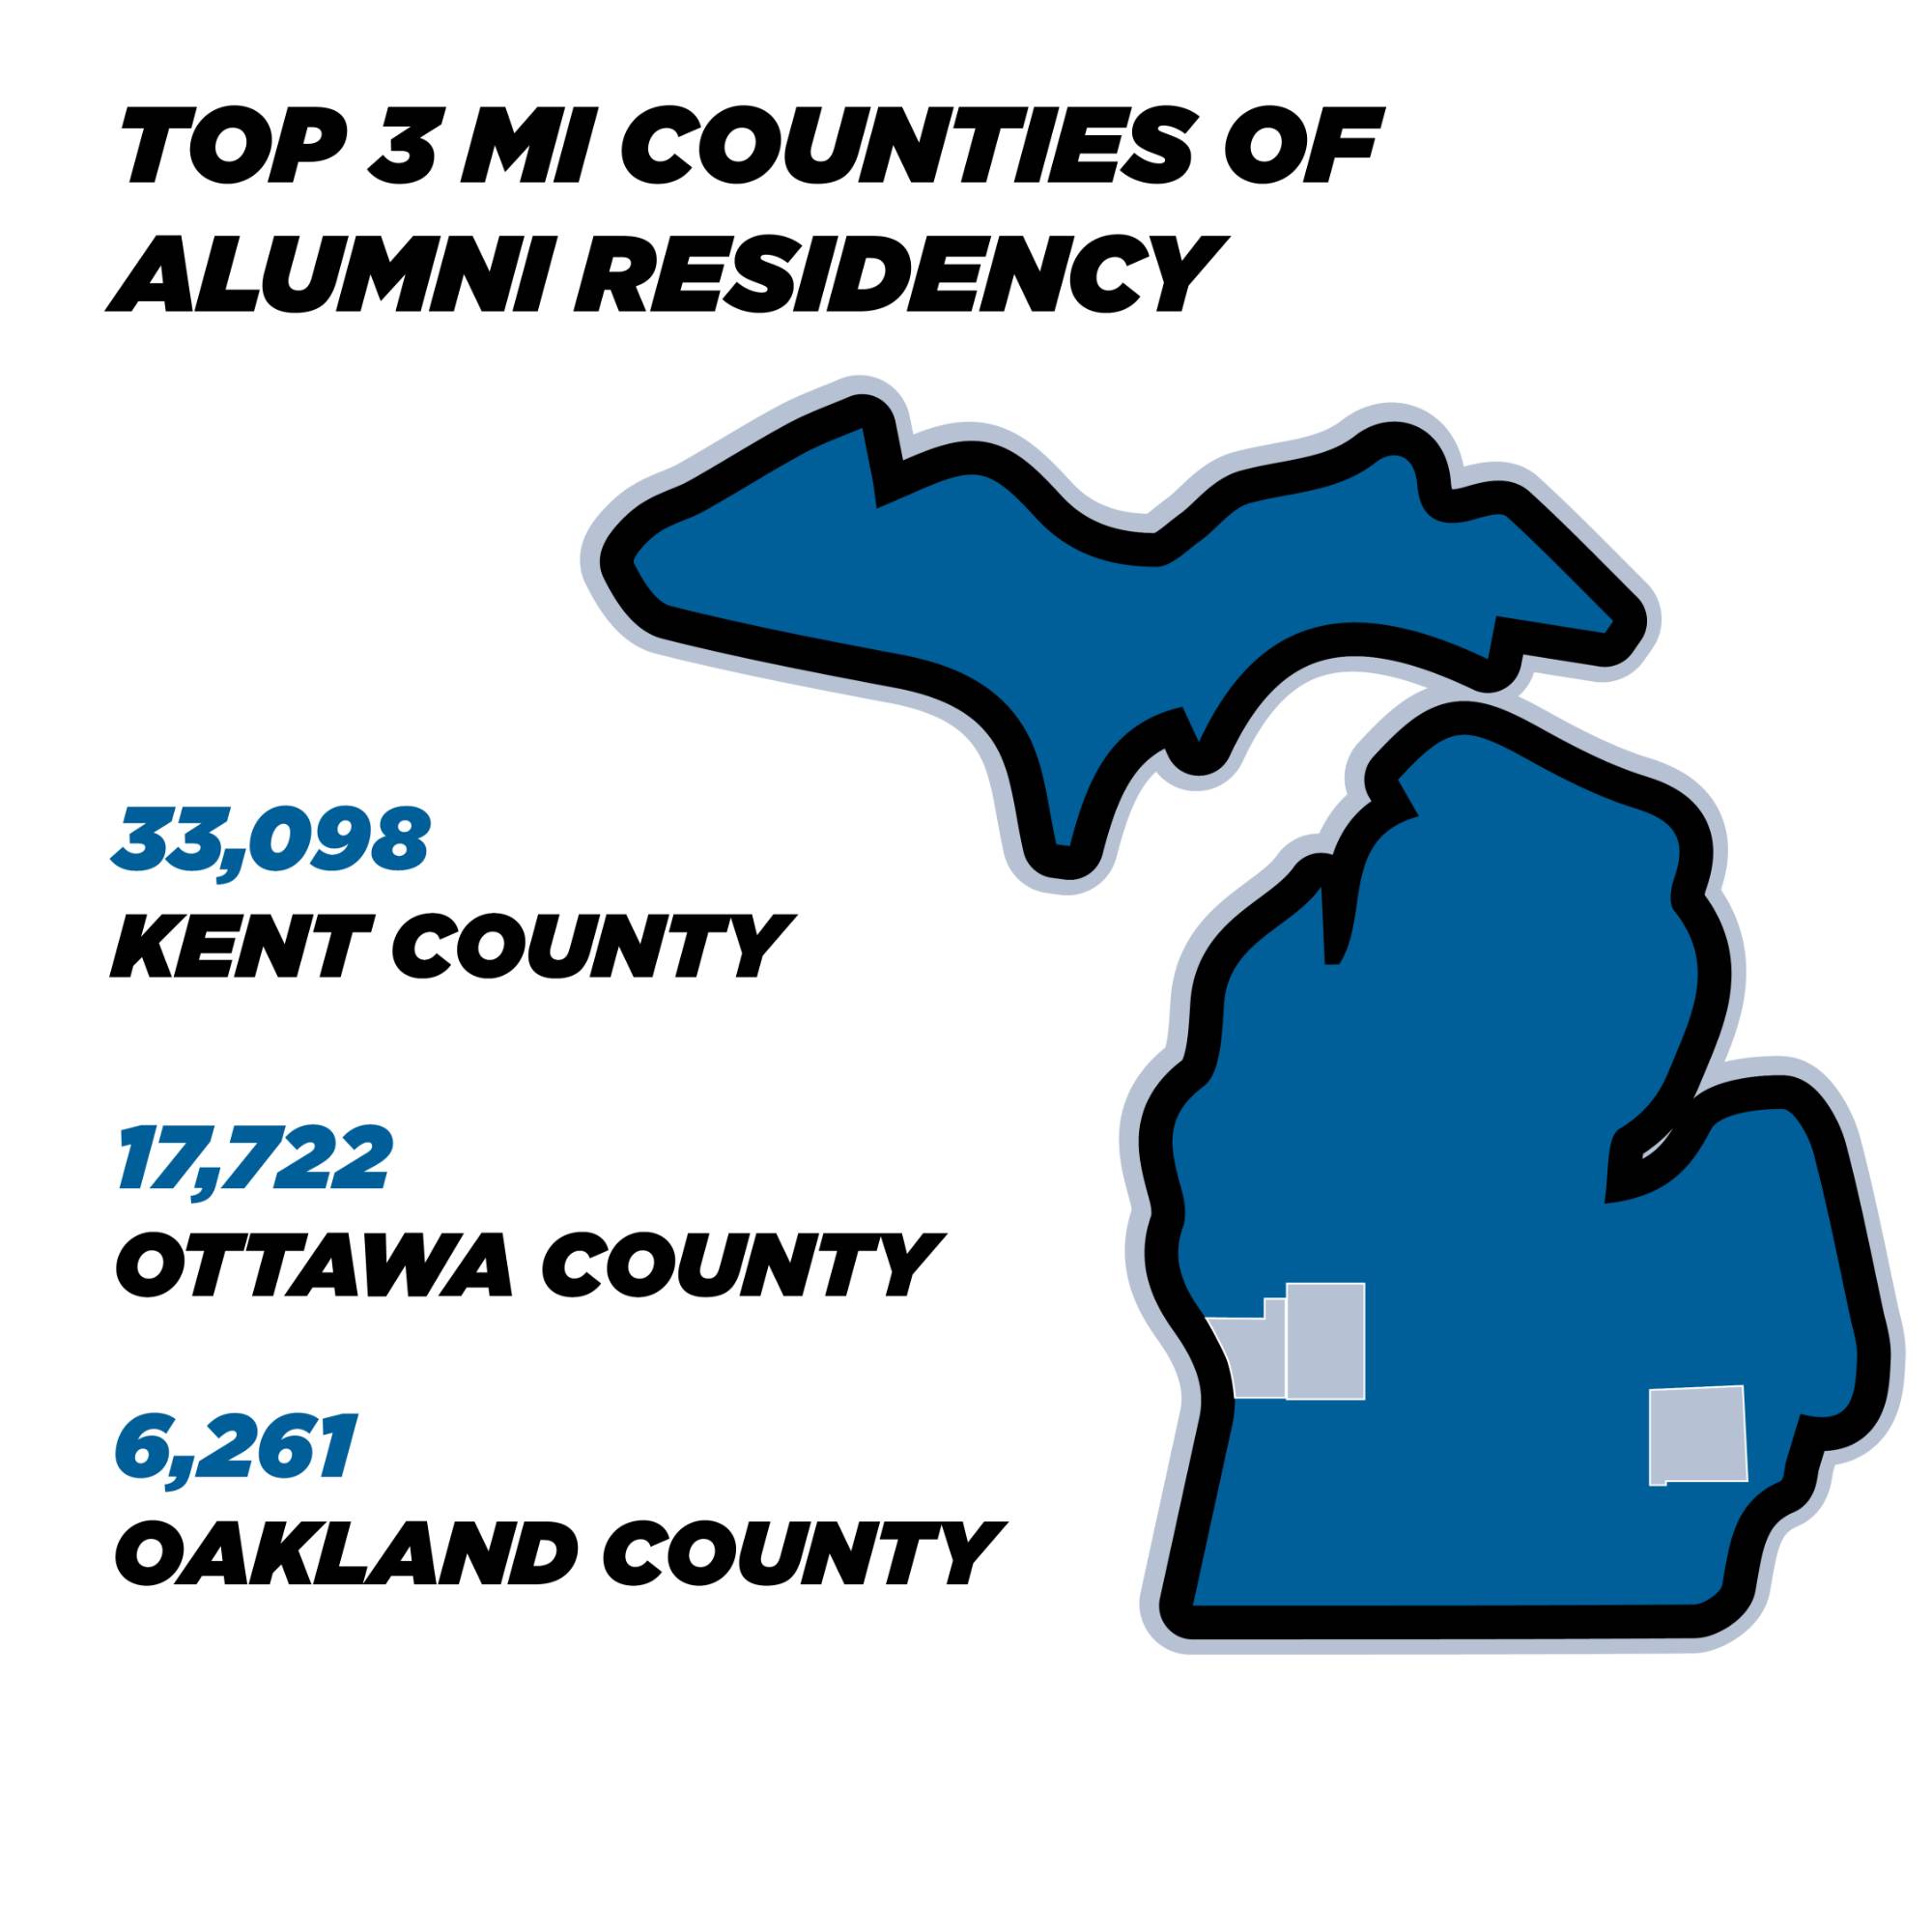 Top Three Counties in Michigan: 33,098 Kent County, 17,722 Ottawa County, 6,261 Oakland County